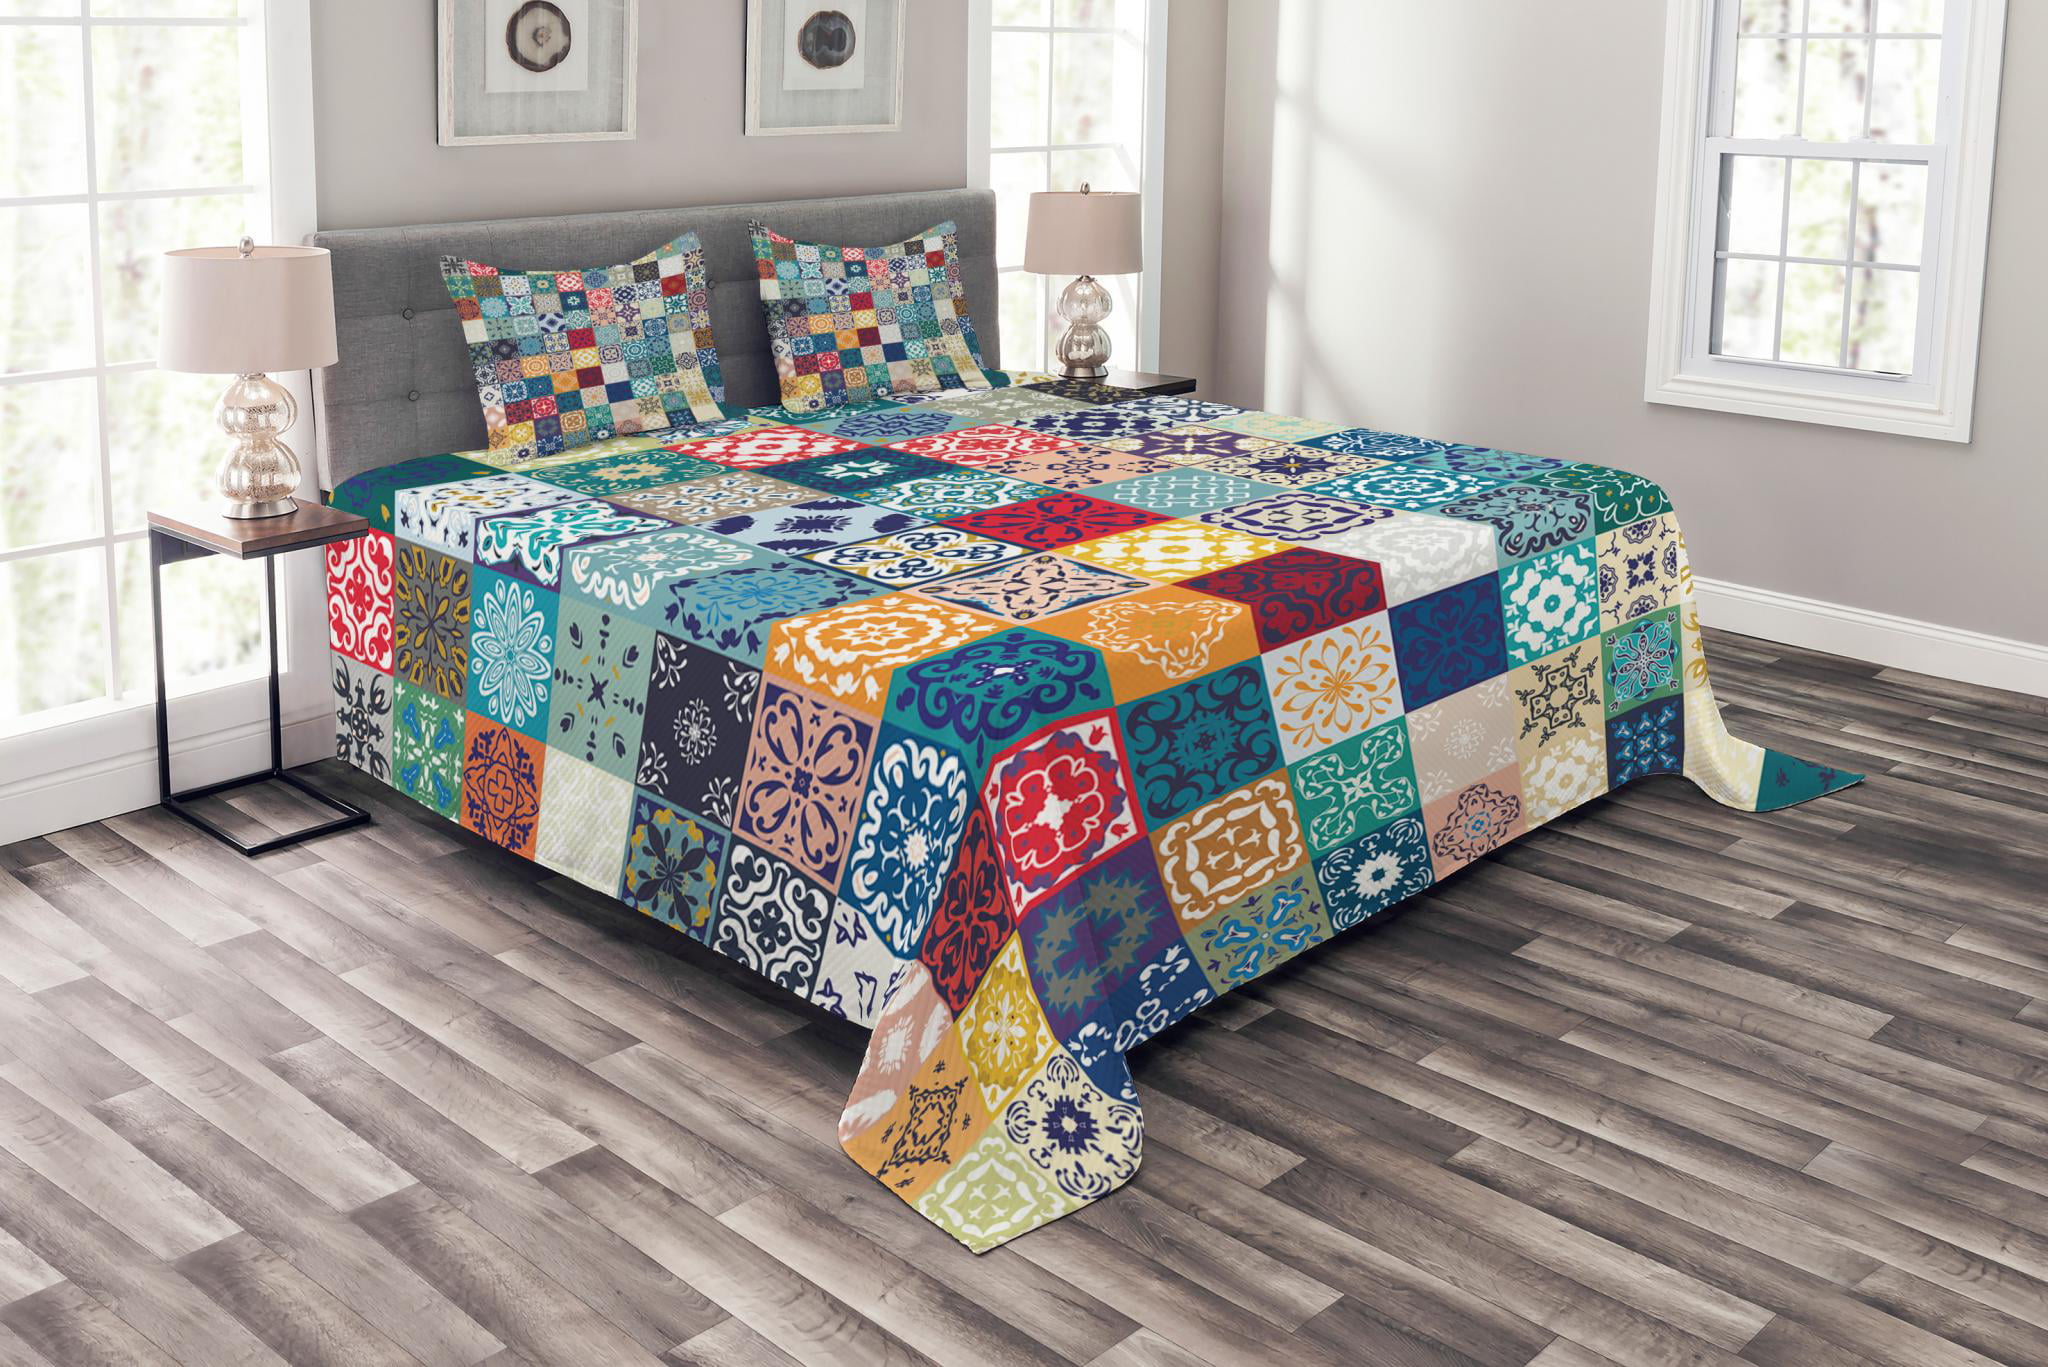 Details about   Abstract Quilted Bedspread & Pillow Shams Set Colorful Retro Scales Print 